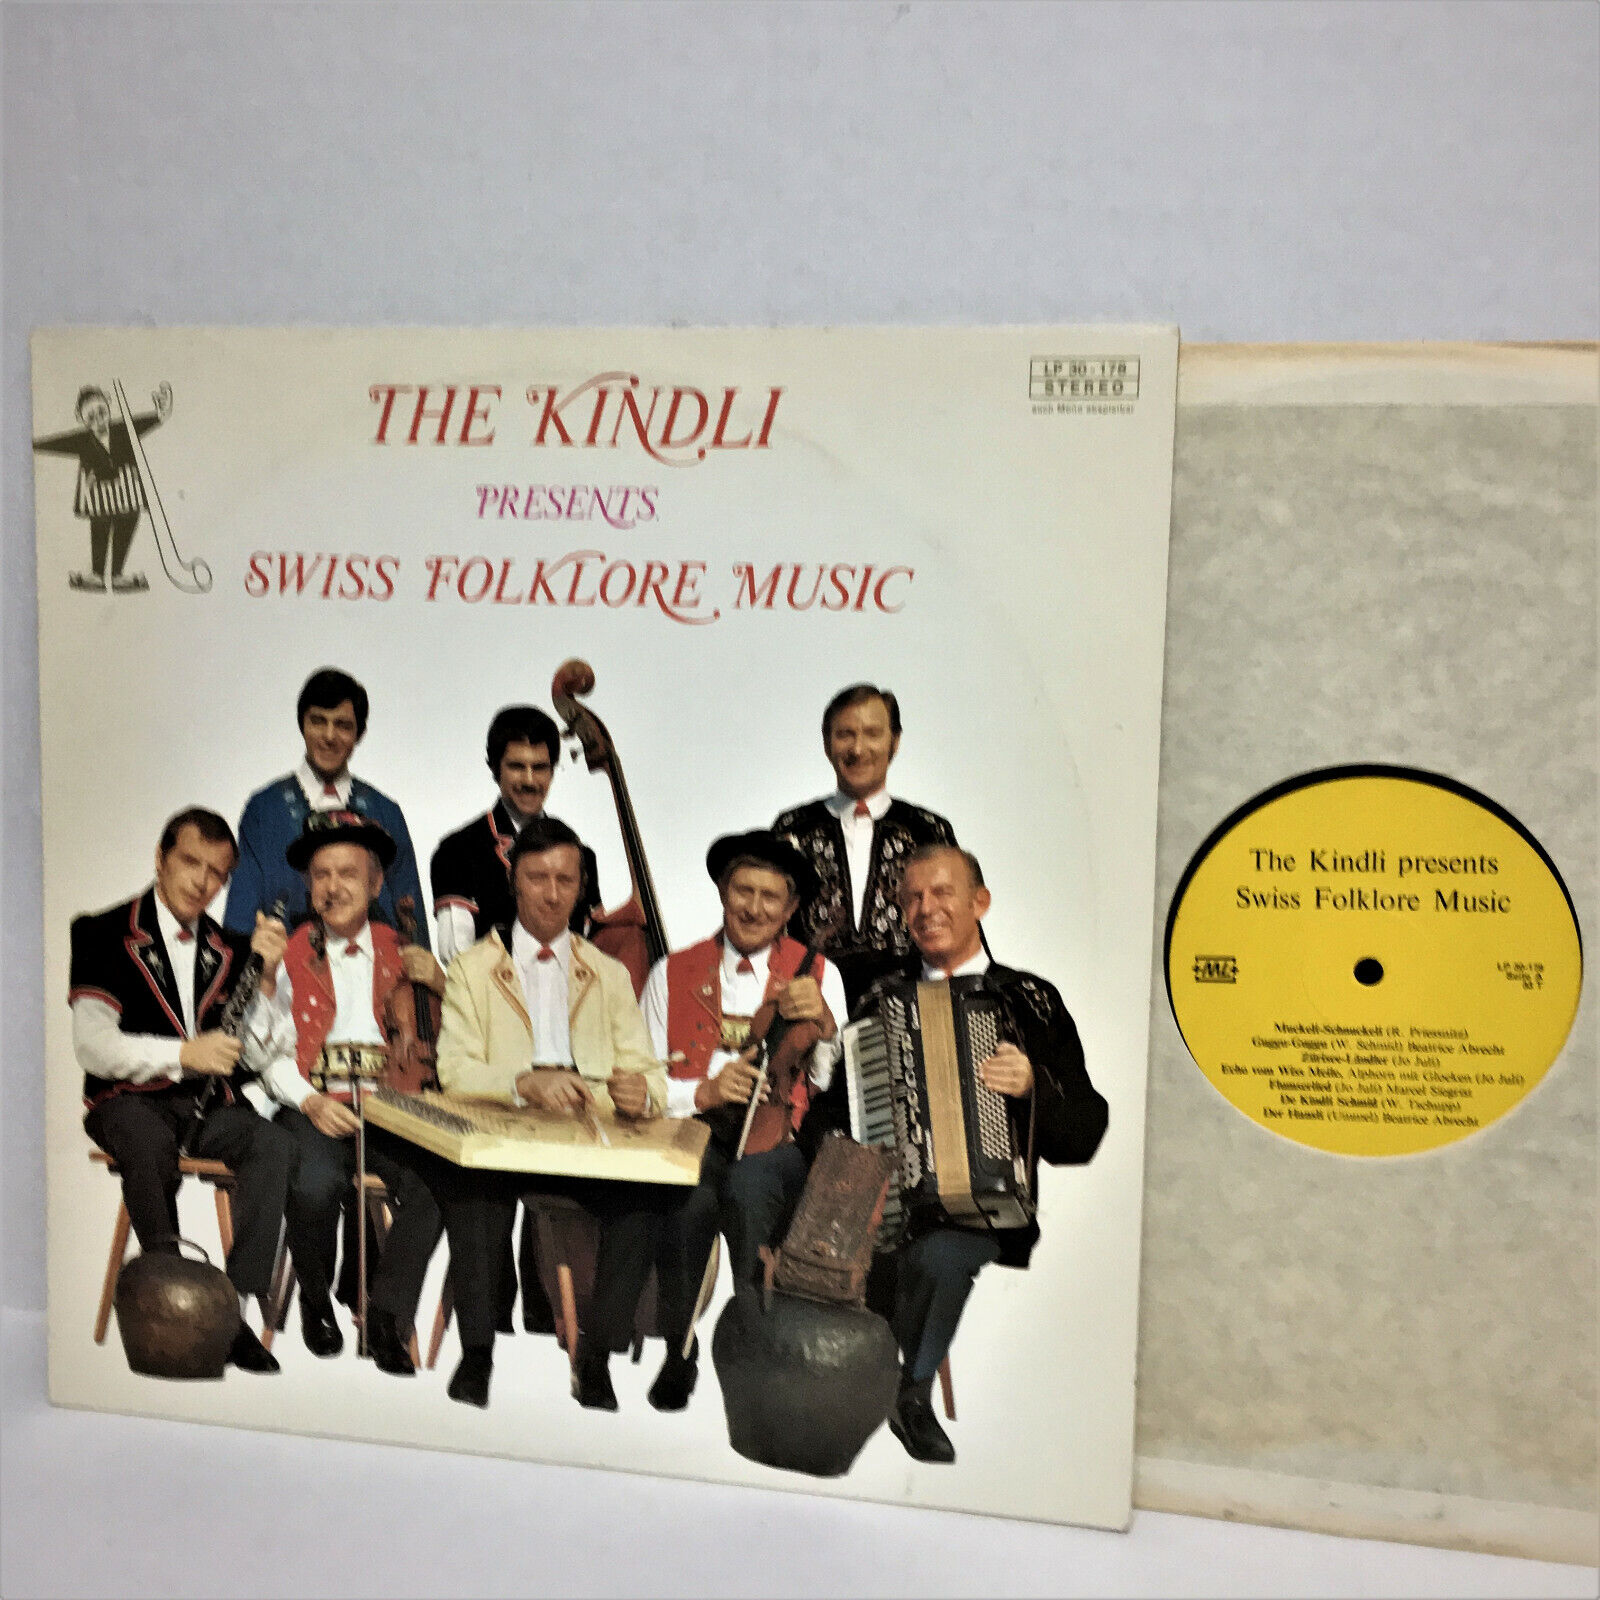 THE KINDLI PRESENTS SWISS FOLKLORE MUSIC USED 33 RPM LP, ML RECORDS NICE,SIGNED